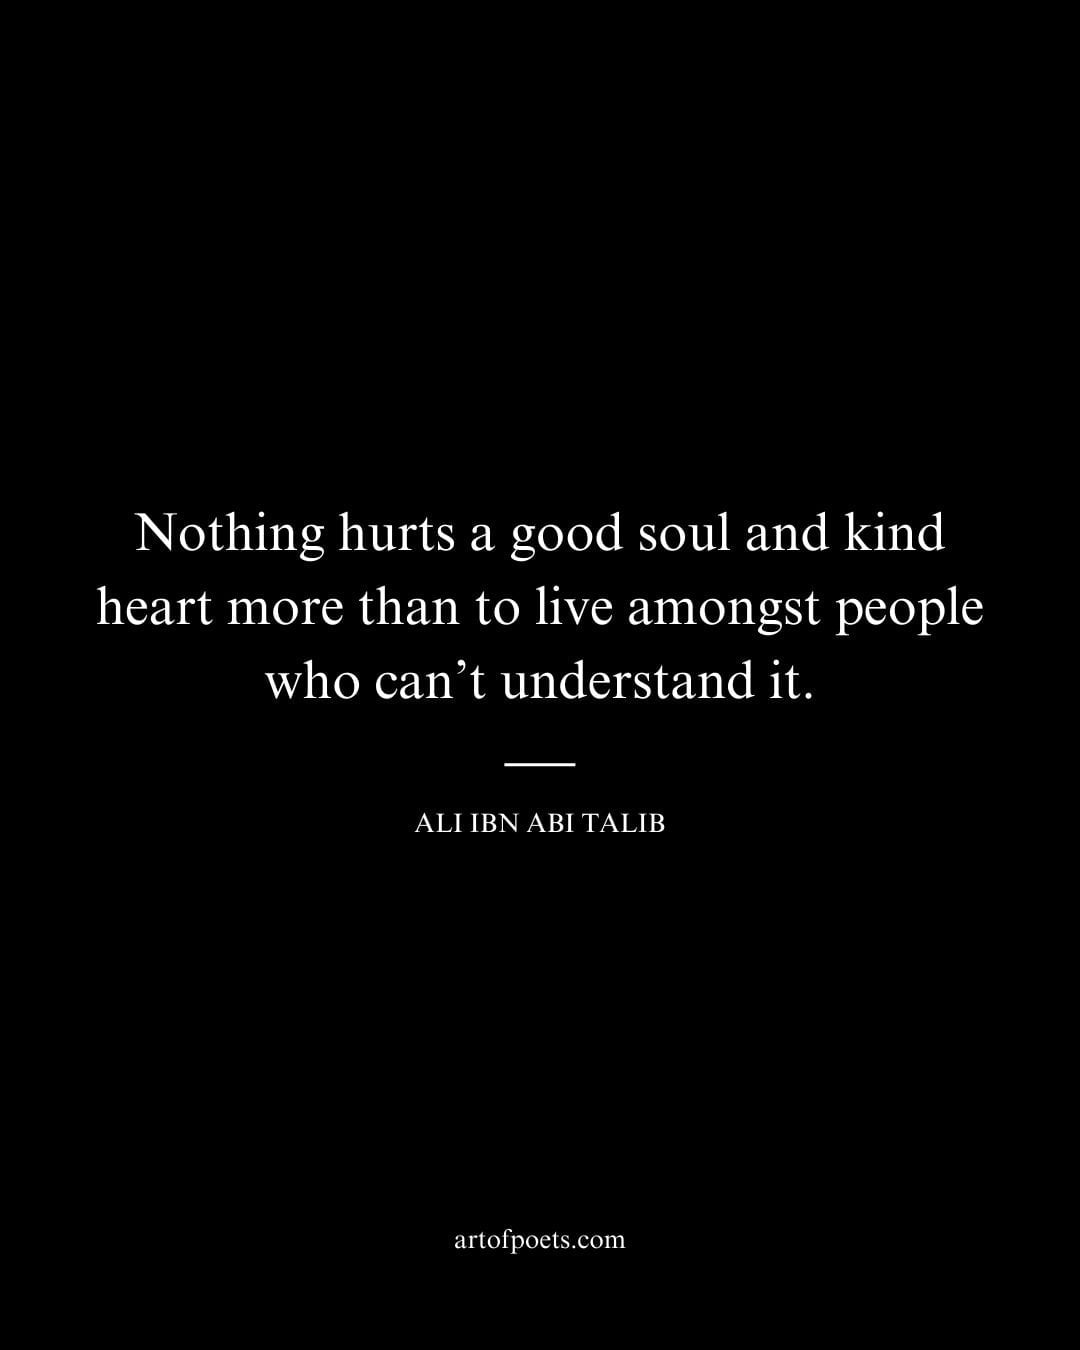 Nothing hurts a good soul and kind heart more than to live amongst people who cant understand it